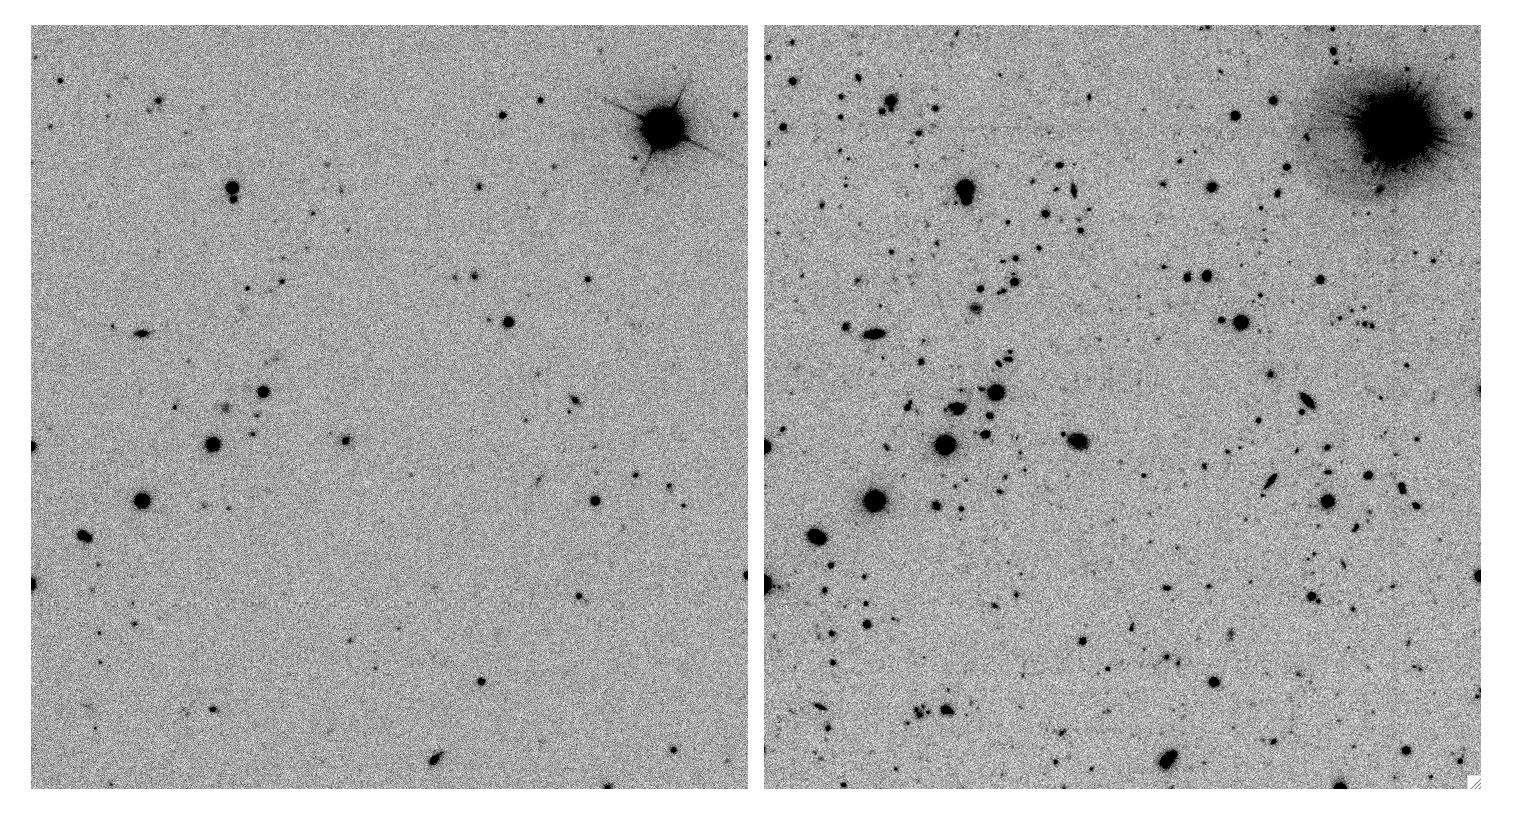 Layering photos of one area of sky taken at various time periods, a process called coaddition, can increase the sensitivity of the images six fold by removing errors and enhancing faint light signals. The image on the left show a single picture of galaxies from the SDSS Stripe 82 area of sky. The image on the right shows the same area with the layered effect, increasing the number of visible, distant galaxies. (Image credit SDSS)  